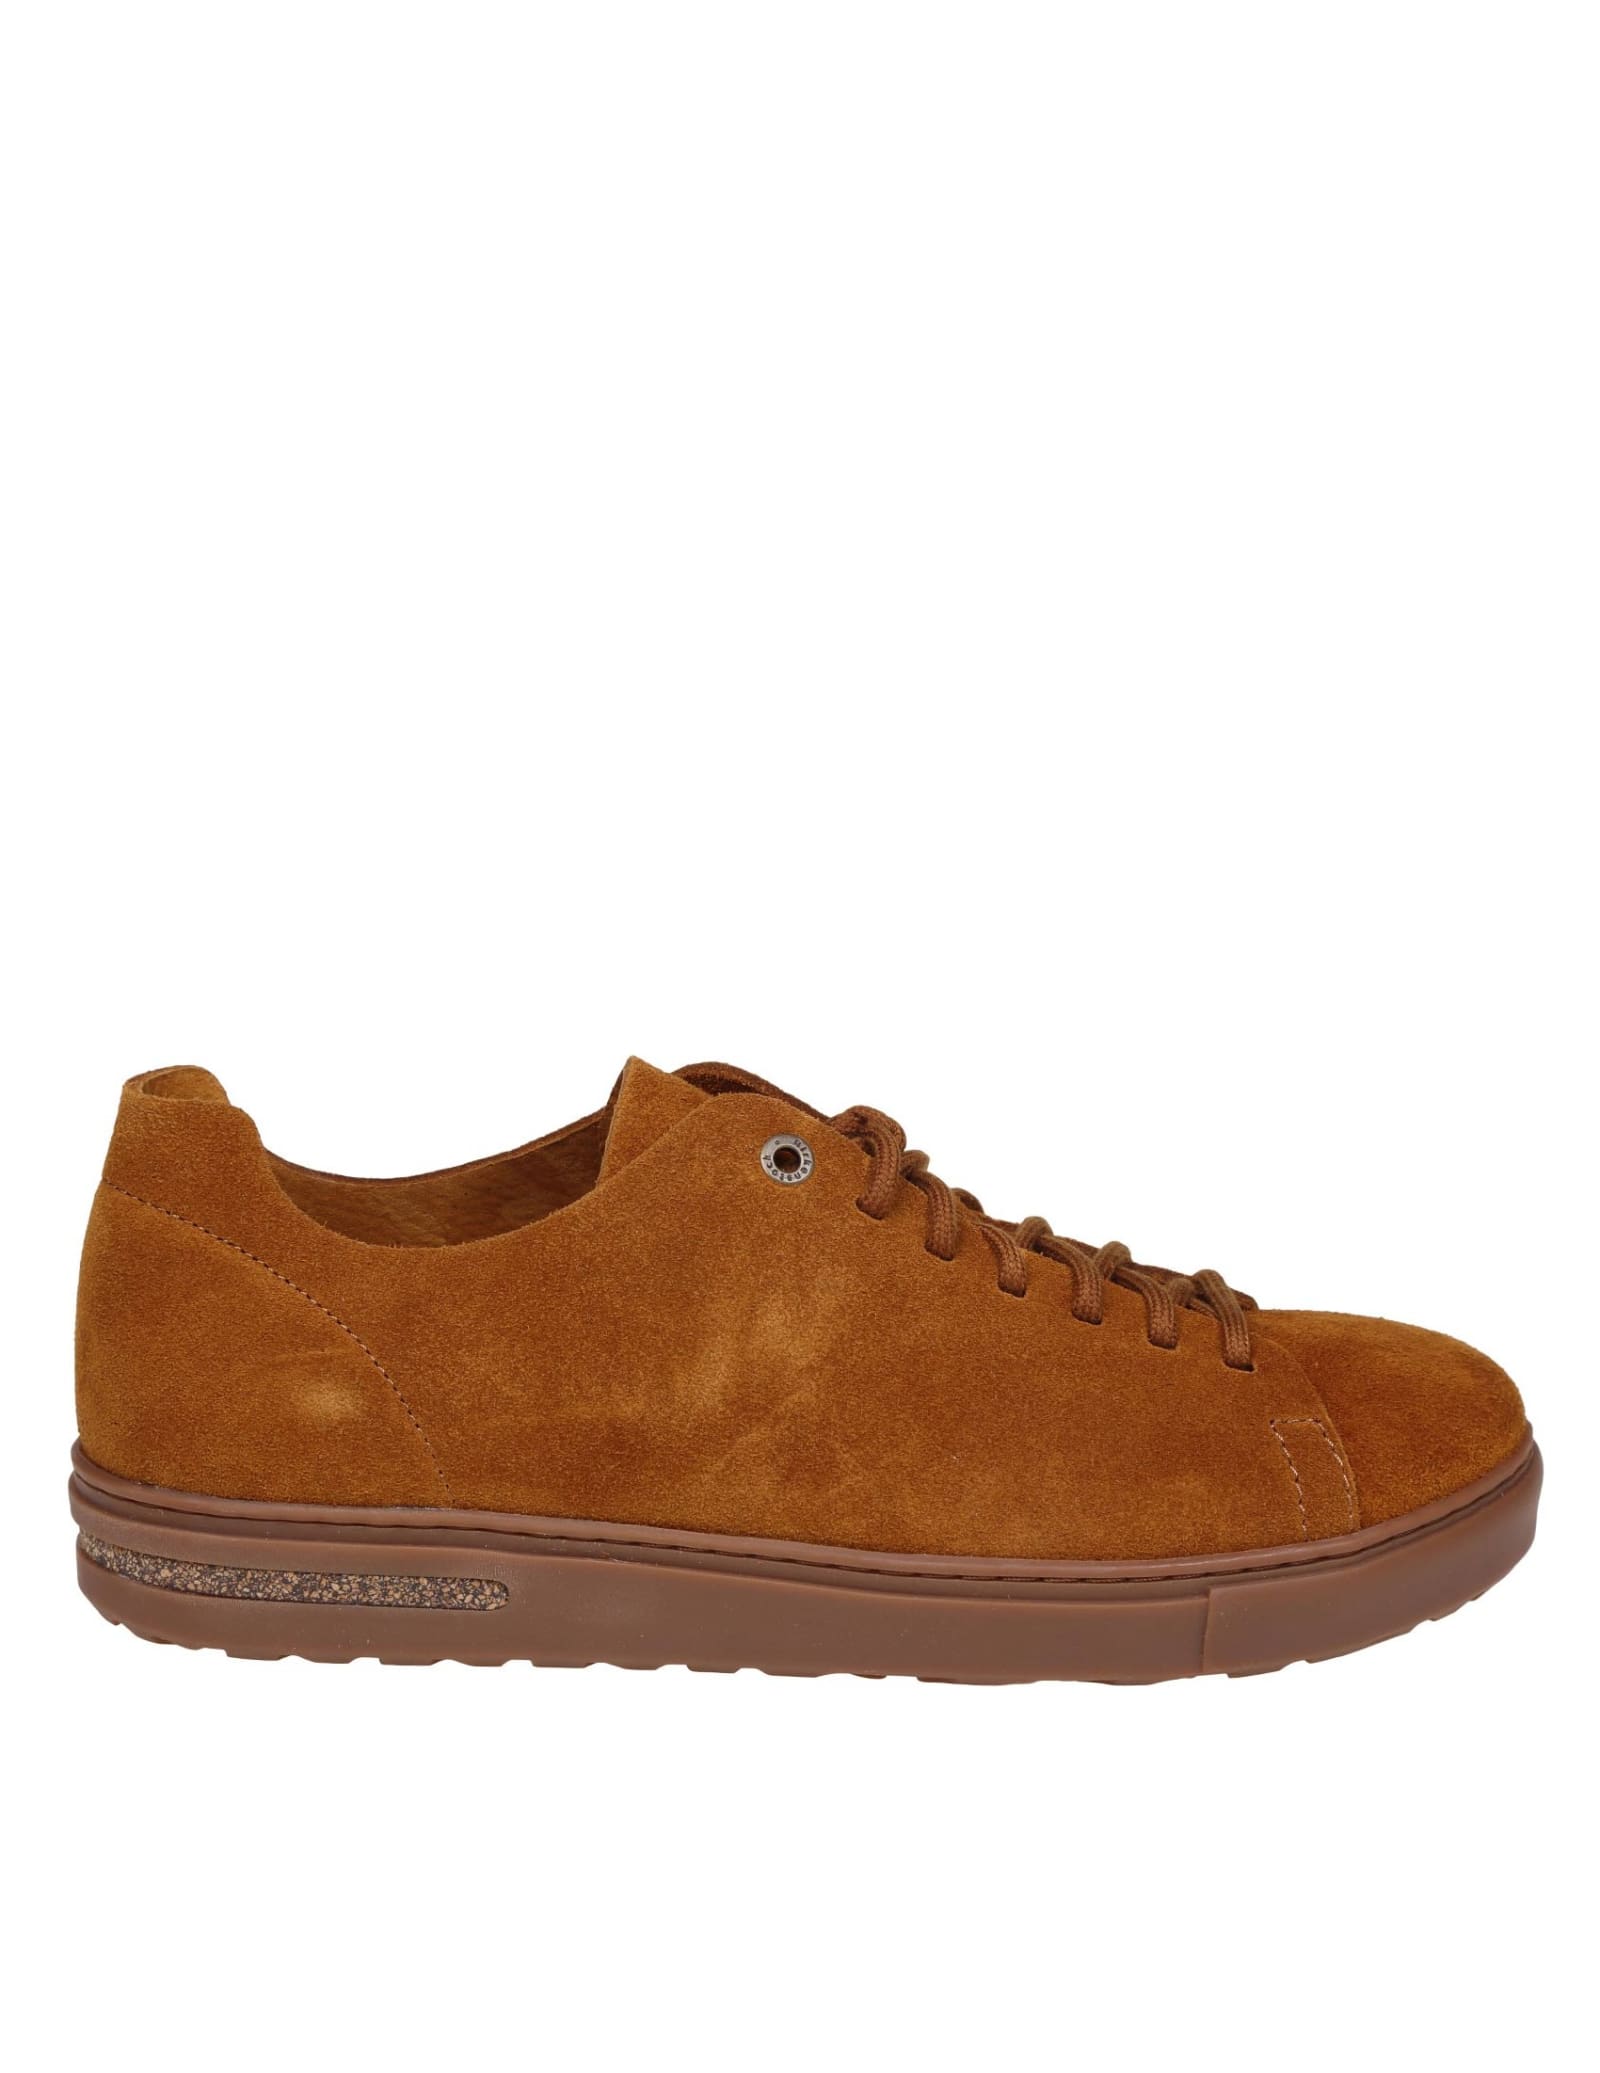 Bend Low Sneakers In Mink Color Suede Leather